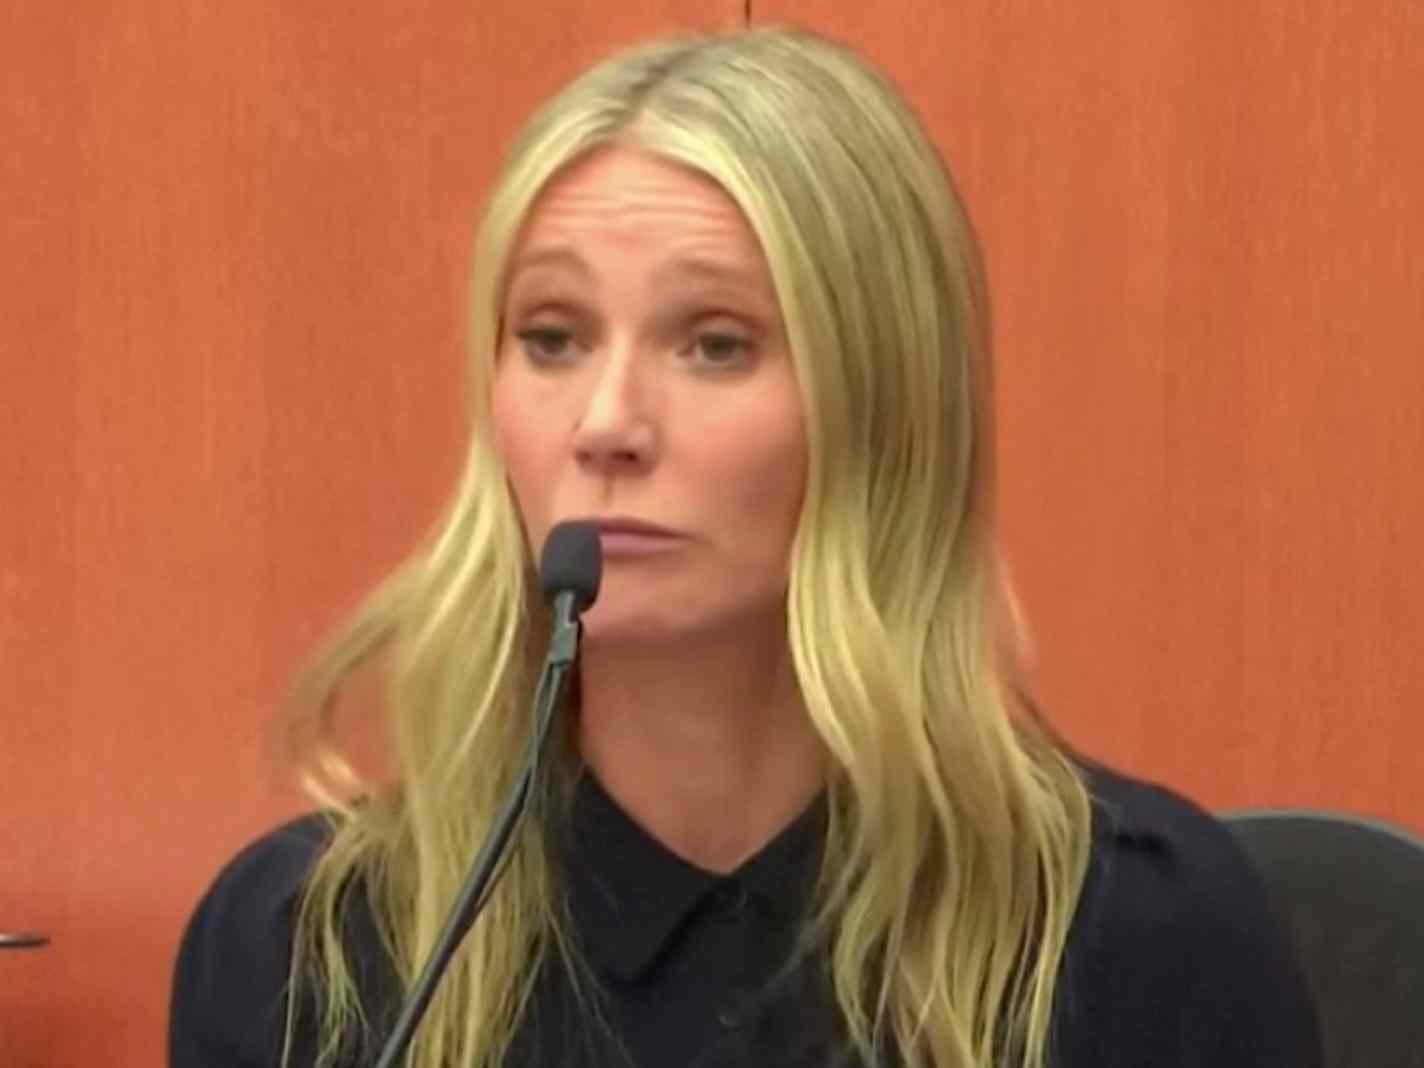 From Courtroom Outfits To Charming The Oppo Lawyer: Gwyneth Paltrow Was A Vibe During Ski Trial